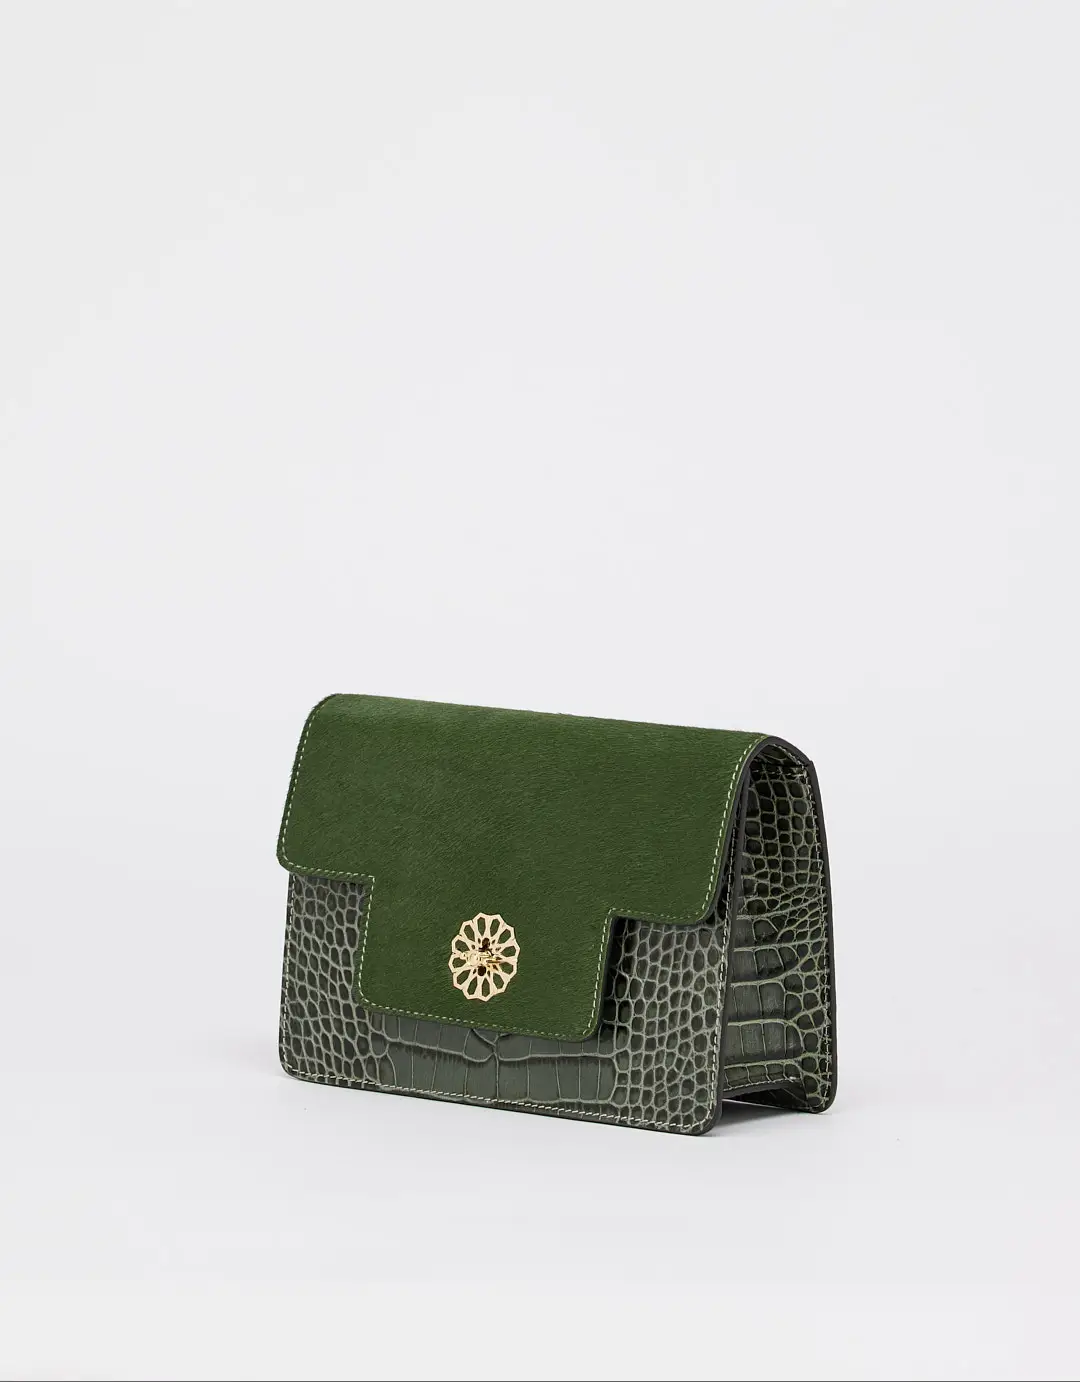 This feminine shoulder bag with a flap is made of calf leather and fur. The Andalous with Croco print is handcrafted from high-quality materials and will turn heads wherever you go. This elegant small bag features an additional storage compartment closed with a zipper, a leather handle, and a mosaic golden magnetic closure, making it both fashionable and functional.